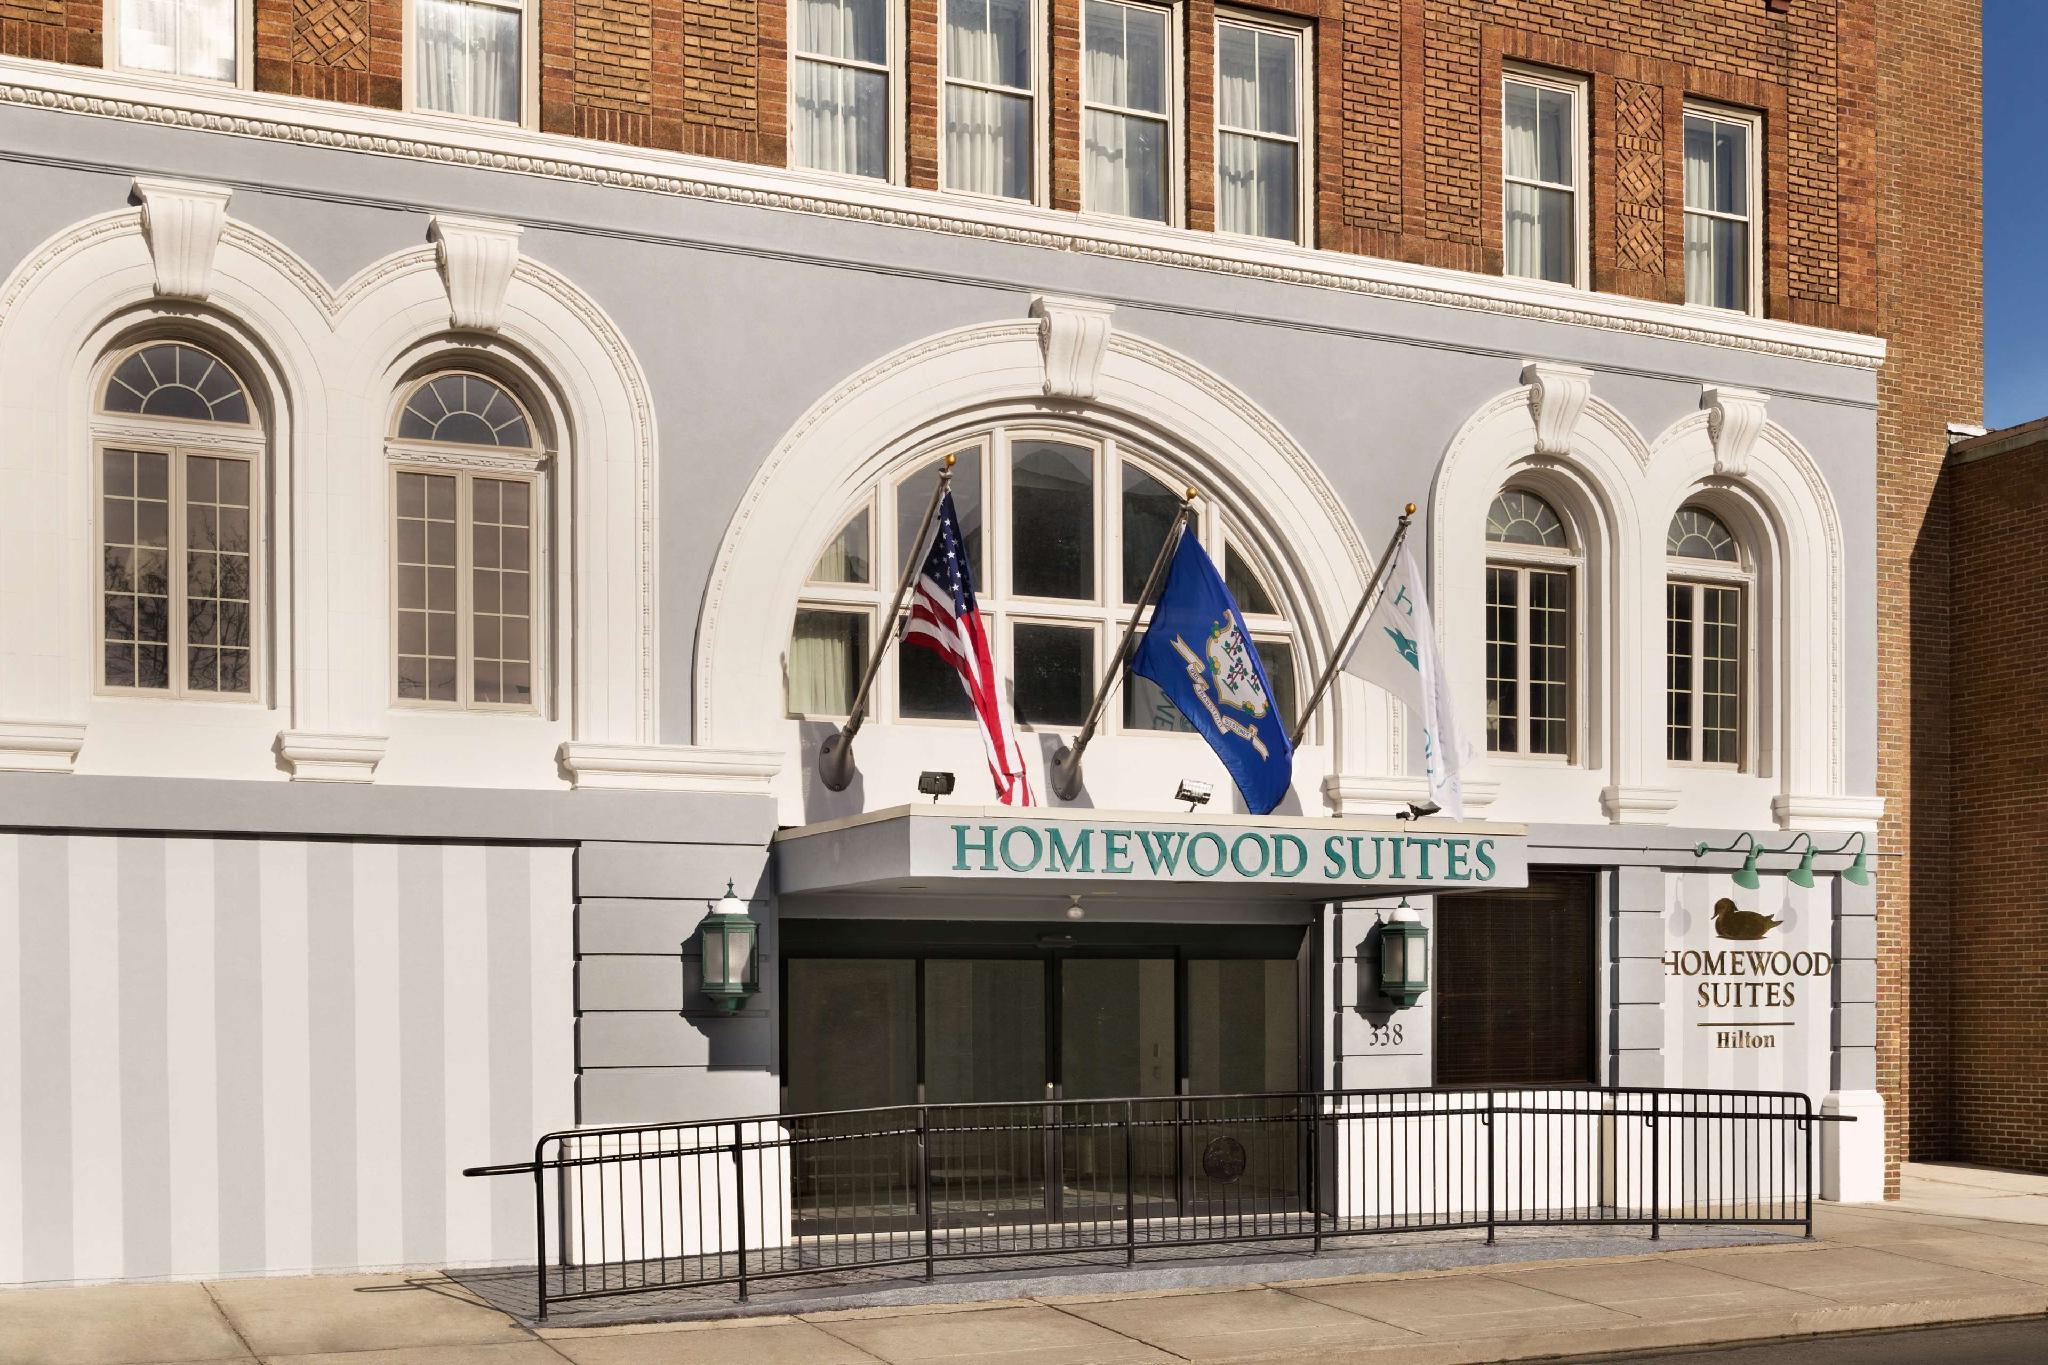 Homewood Suites by Hilton Hartford Downtown - Wadsworth Atheneum Museum of Art